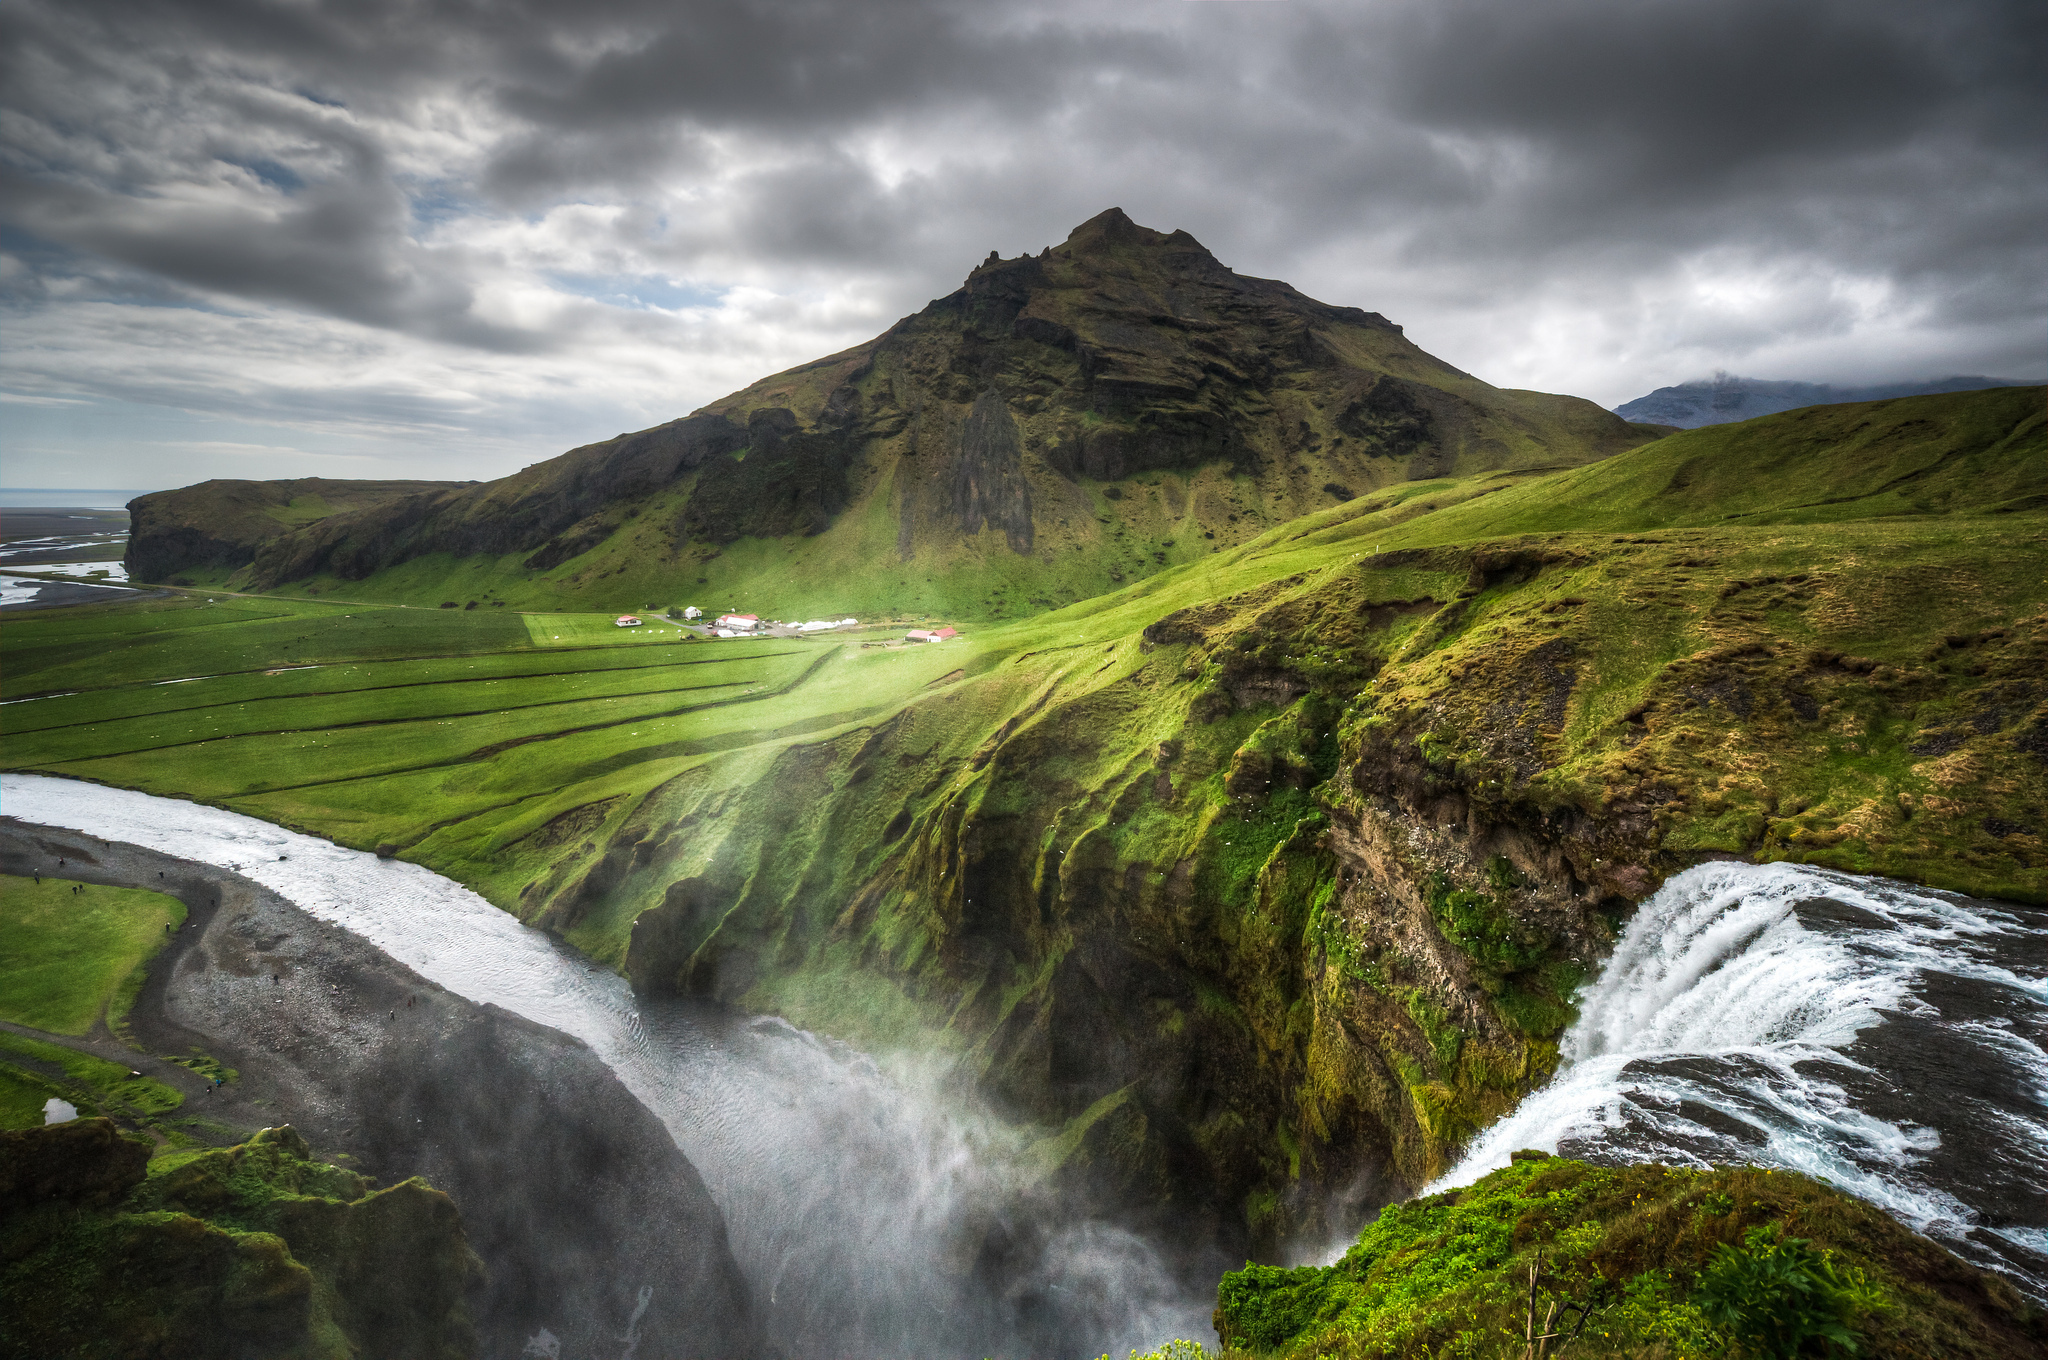 iceland, Nature, Landscapes, Hills, Mountains, Waterfalls, Grass, Rocks, Water, Rivers, Fog, Mist, Haze, Spray, Canyon, Sky, Clouds, Hdr, Scenic, View, Drops, Plants Wallpaper